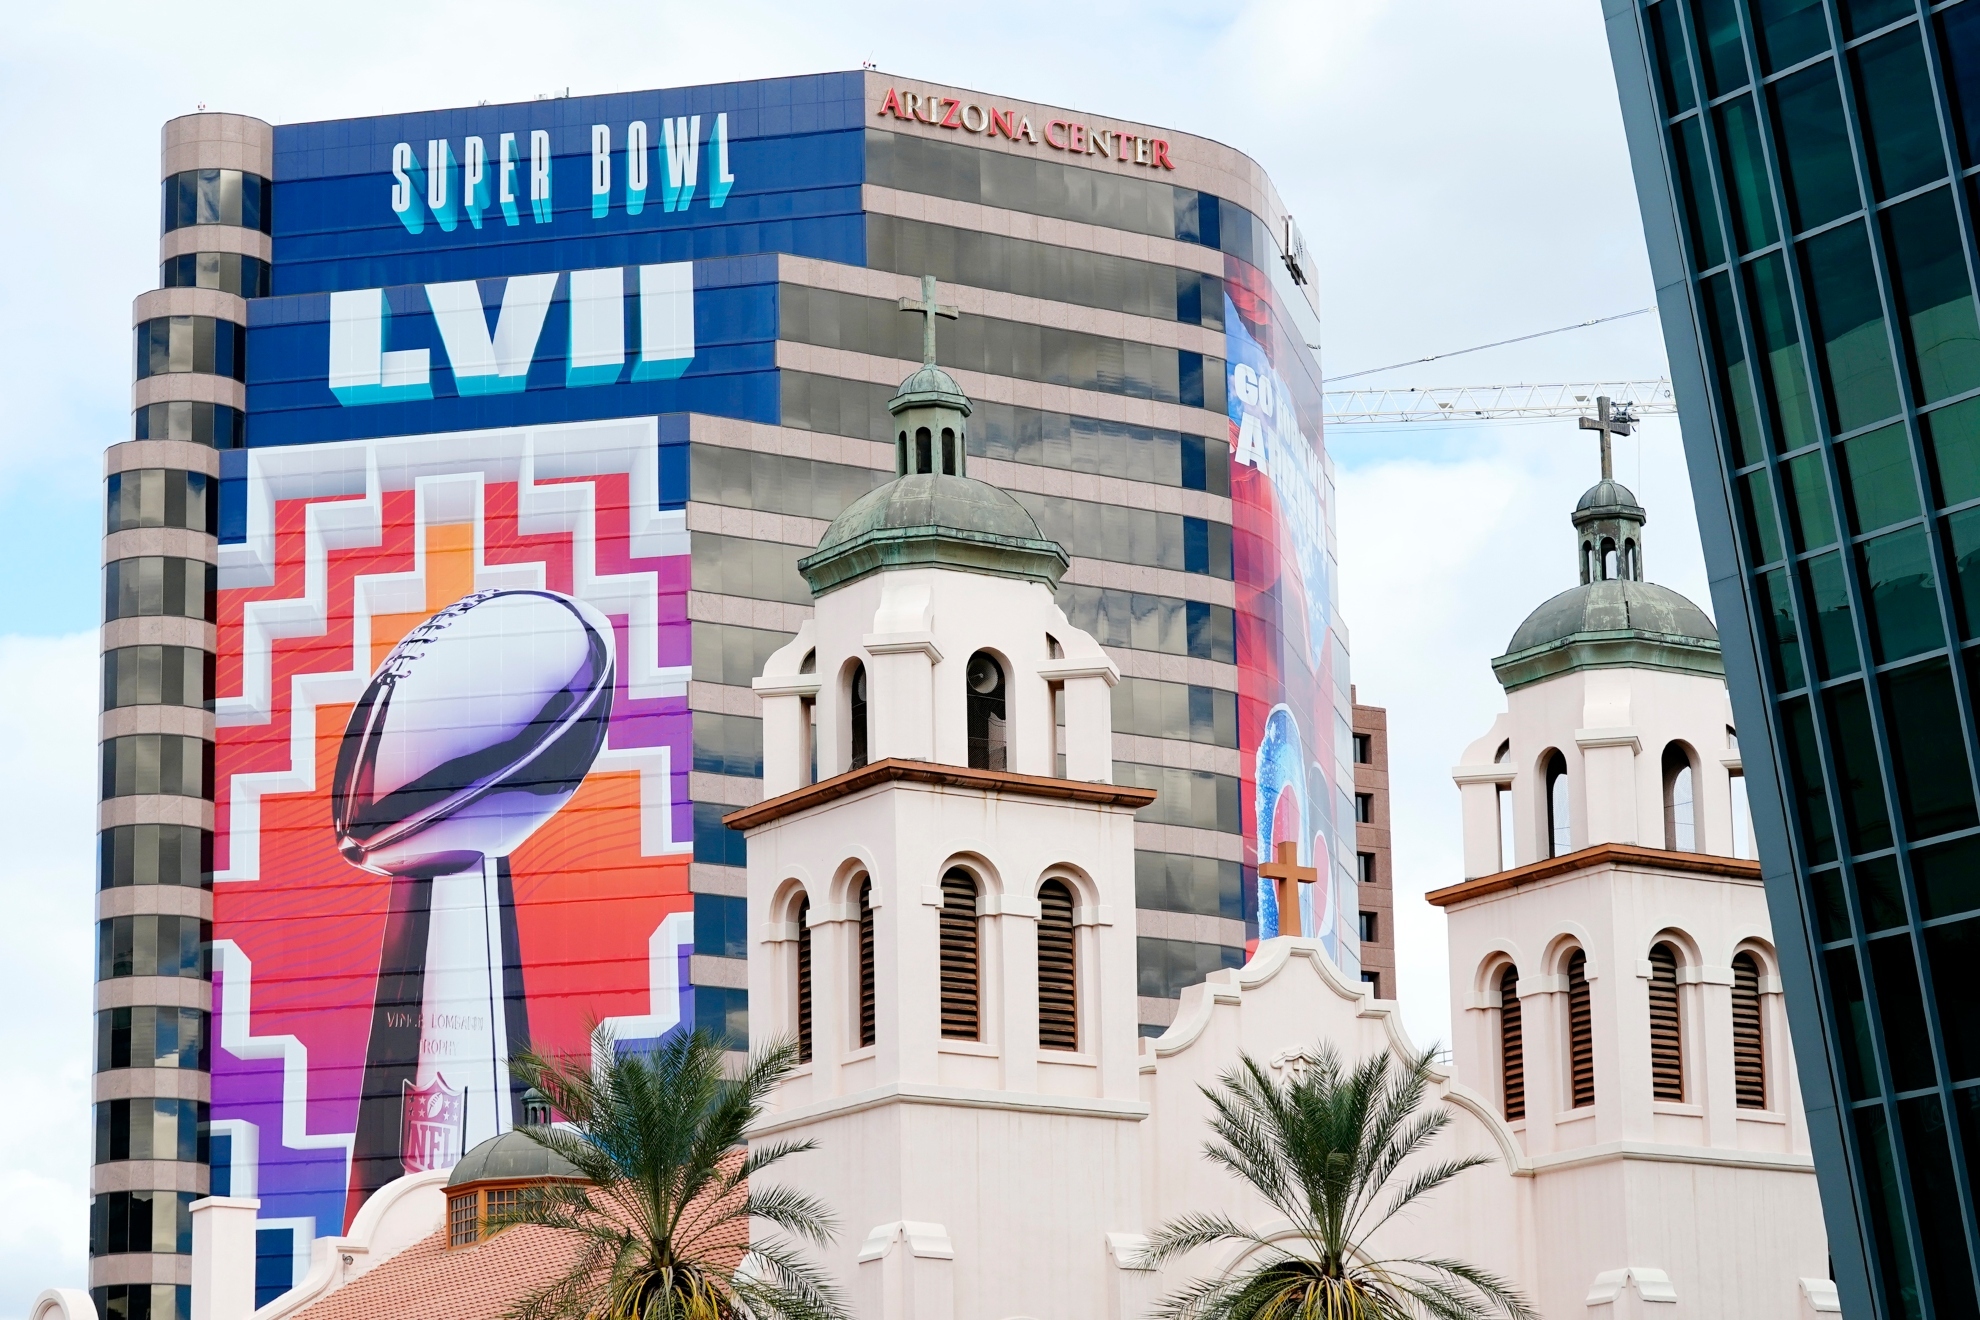 Large Super Bowl signs are on full display, dwarfing St. Mary's Basilica, leading up to the NFL Super Bowl LVII